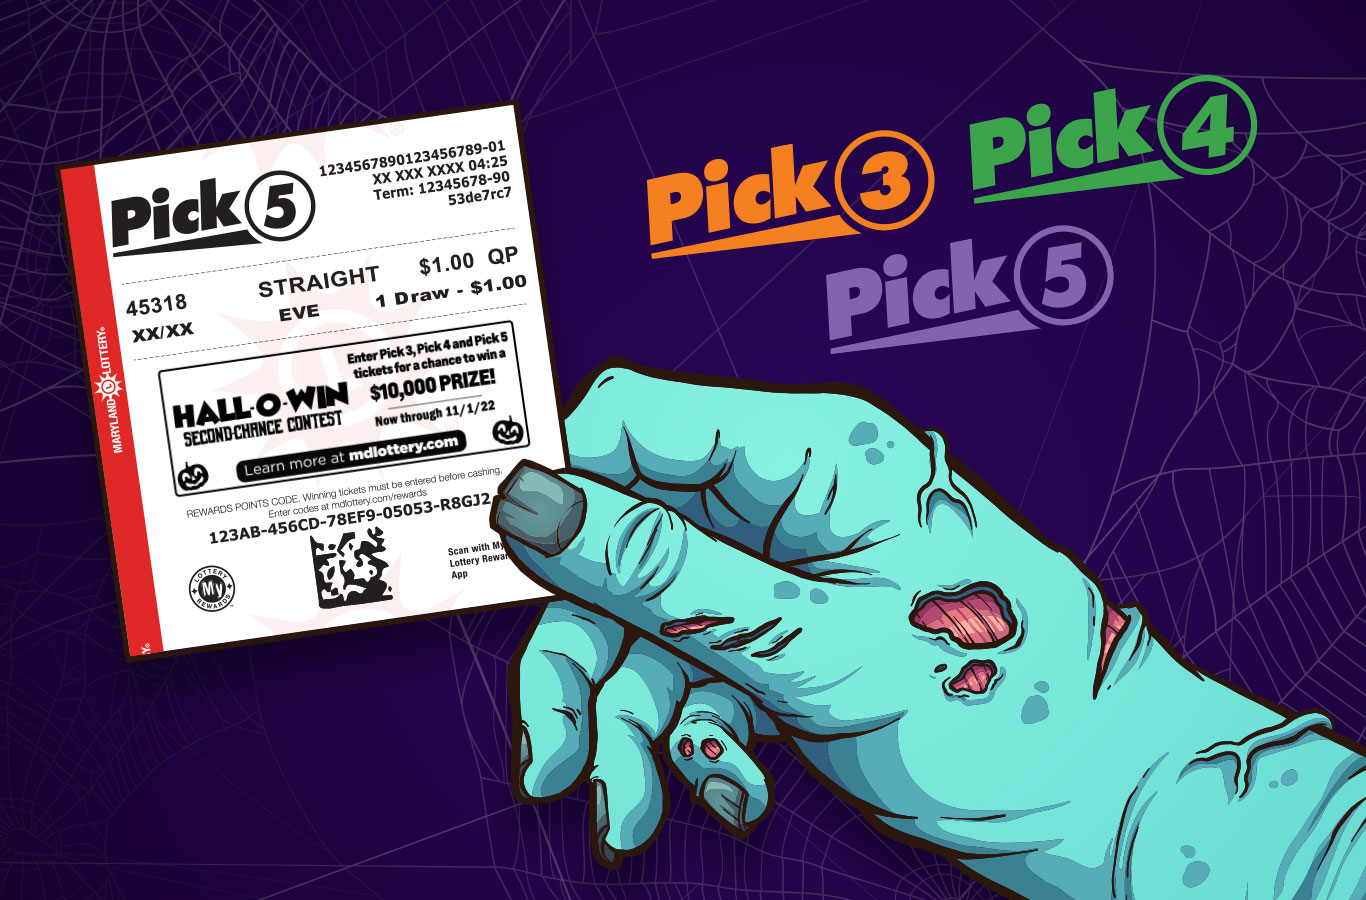 Play the spooktacular new Pick 3, Pick 4, Pick 5 Hall-o-Win Second-Chance Contest. You could win one of five $10,000 cash prizes!